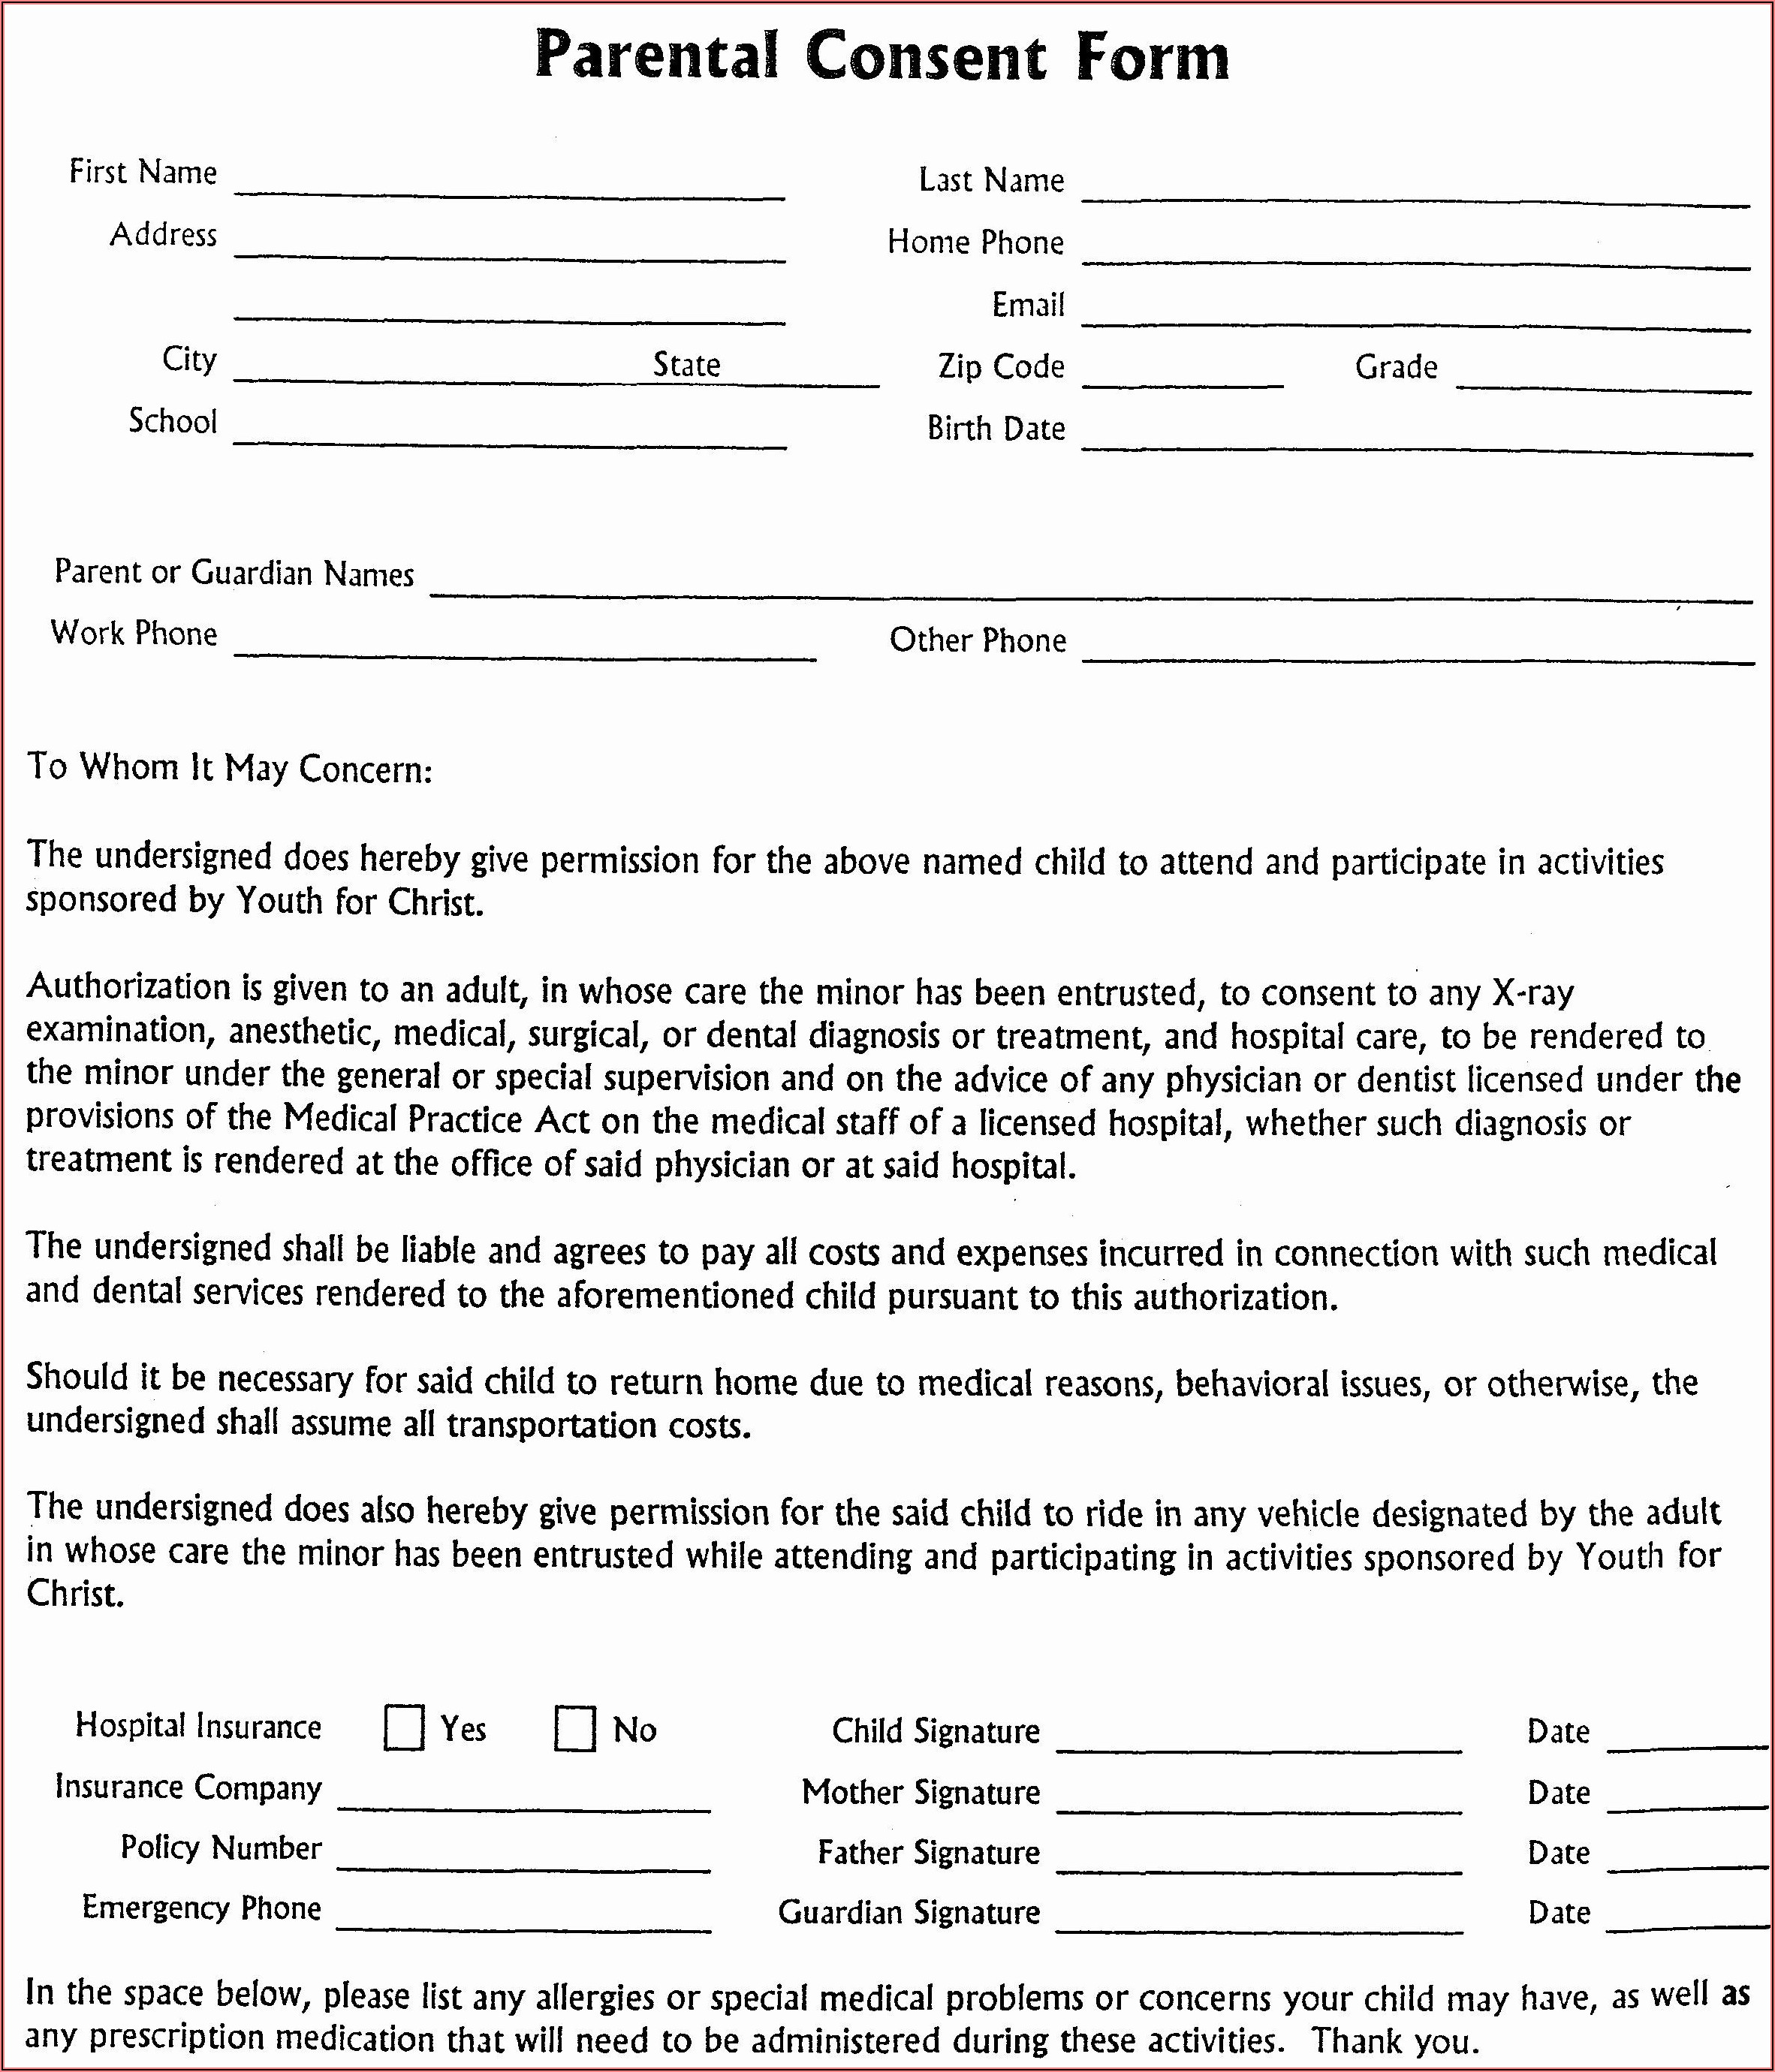 Parental Consent Form For Travel Example